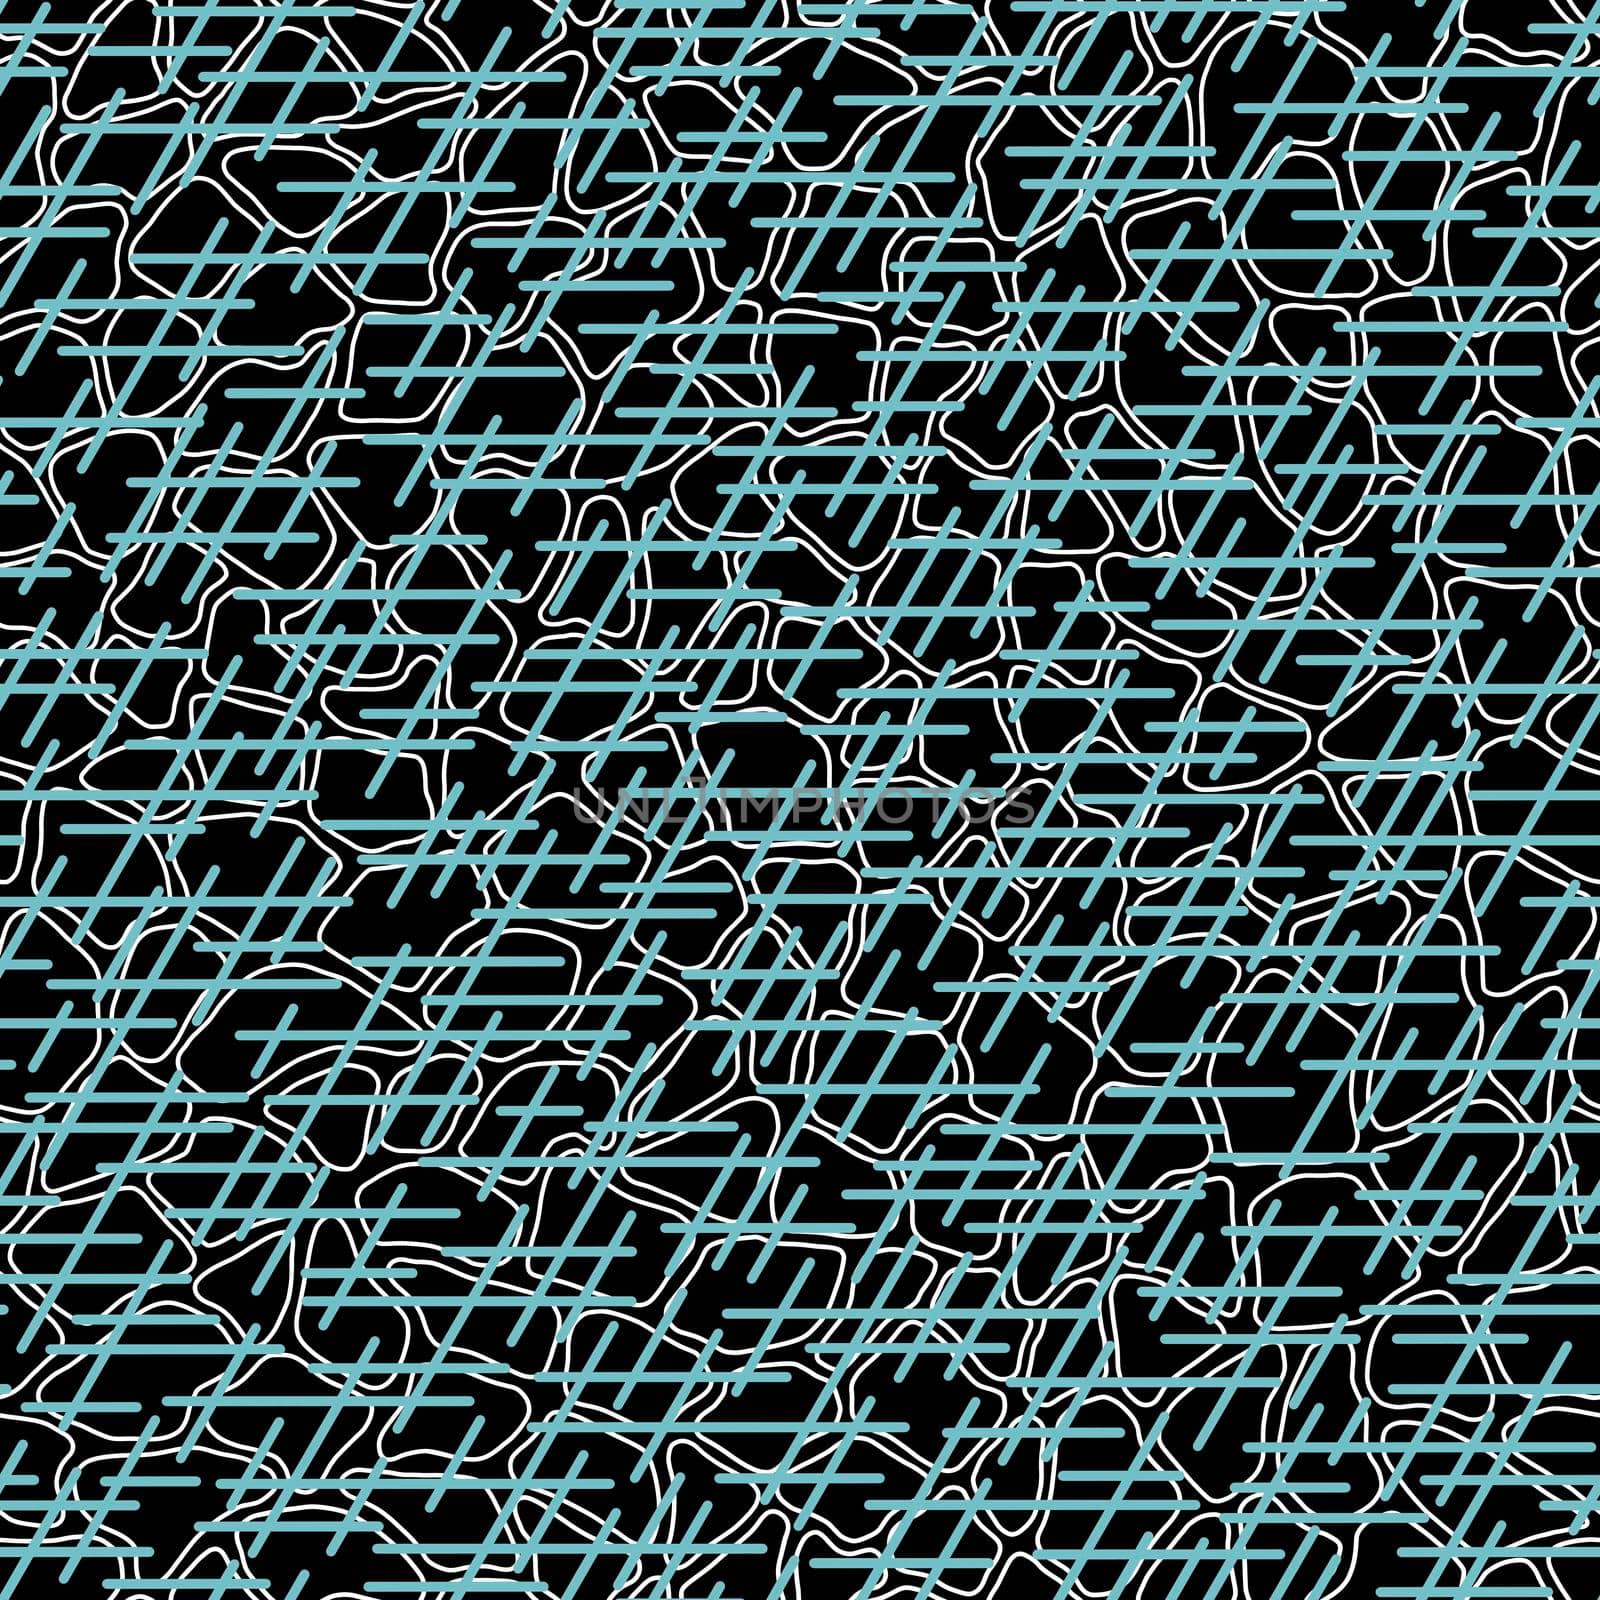 Randomly crossing lines making pattern.Chaotic short lines seamless pattern,chips and sticks modern repeatable motif.Black azure white colors.Good for print, textile,fabric, background, wrapping paper